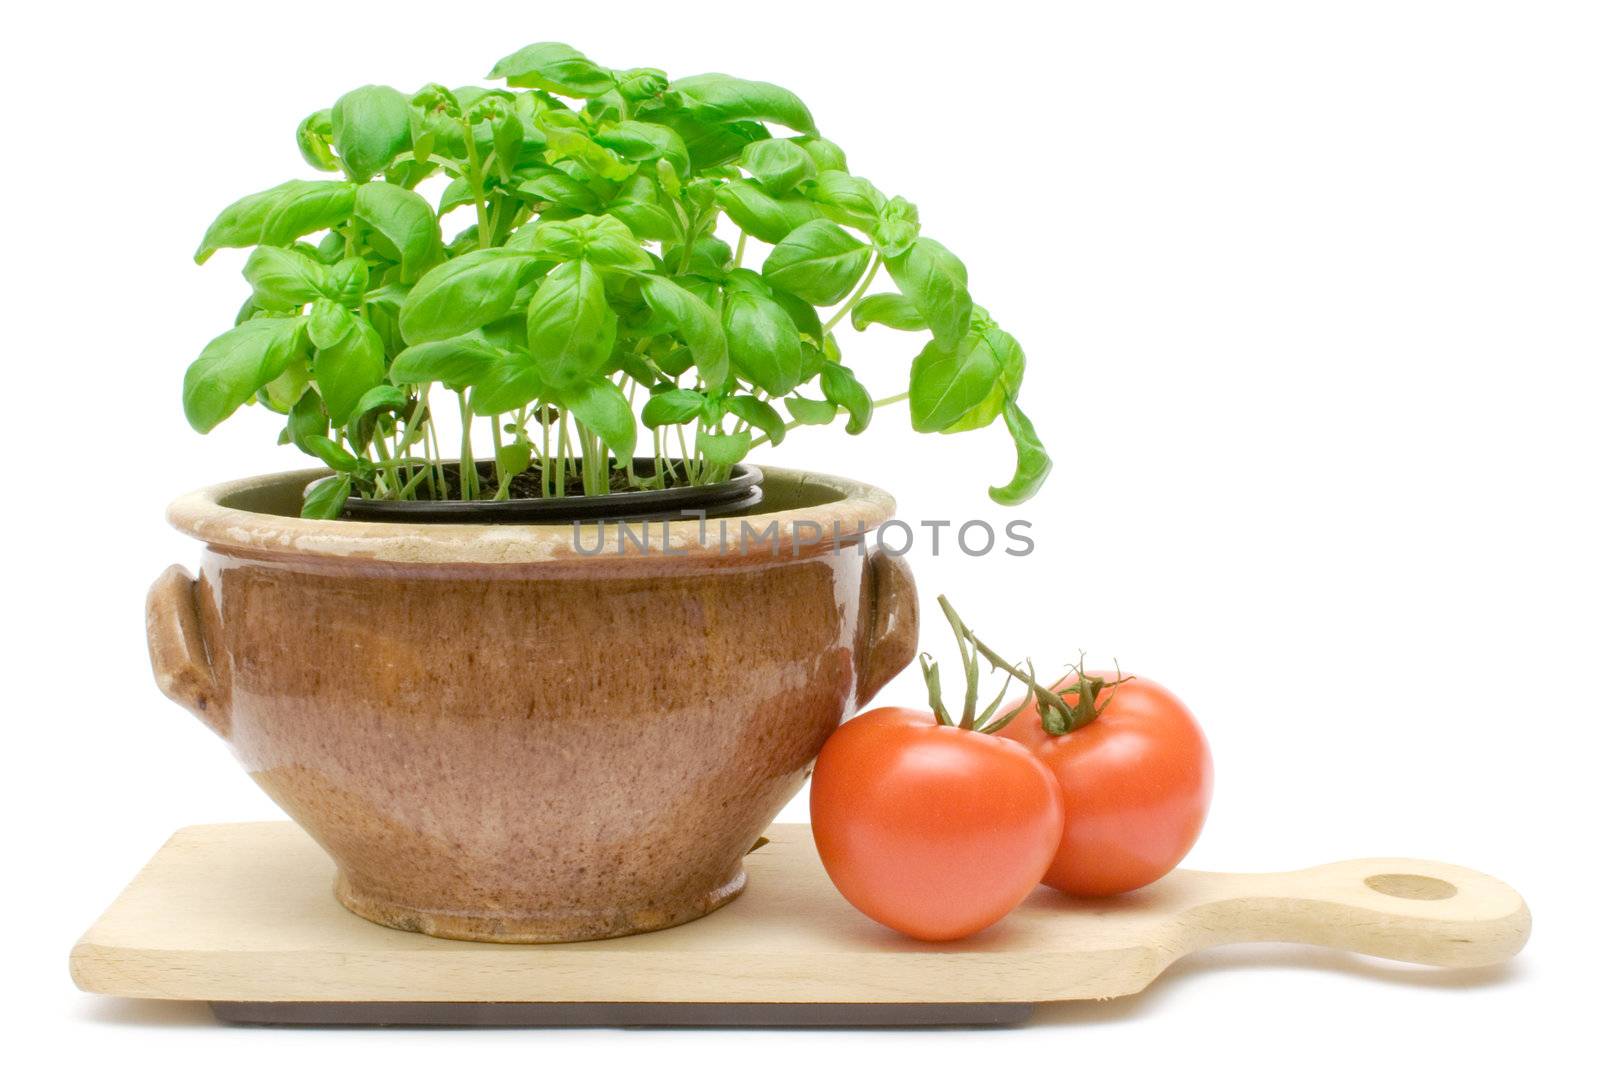 Potted basil and two tomatos isolated on a white background.